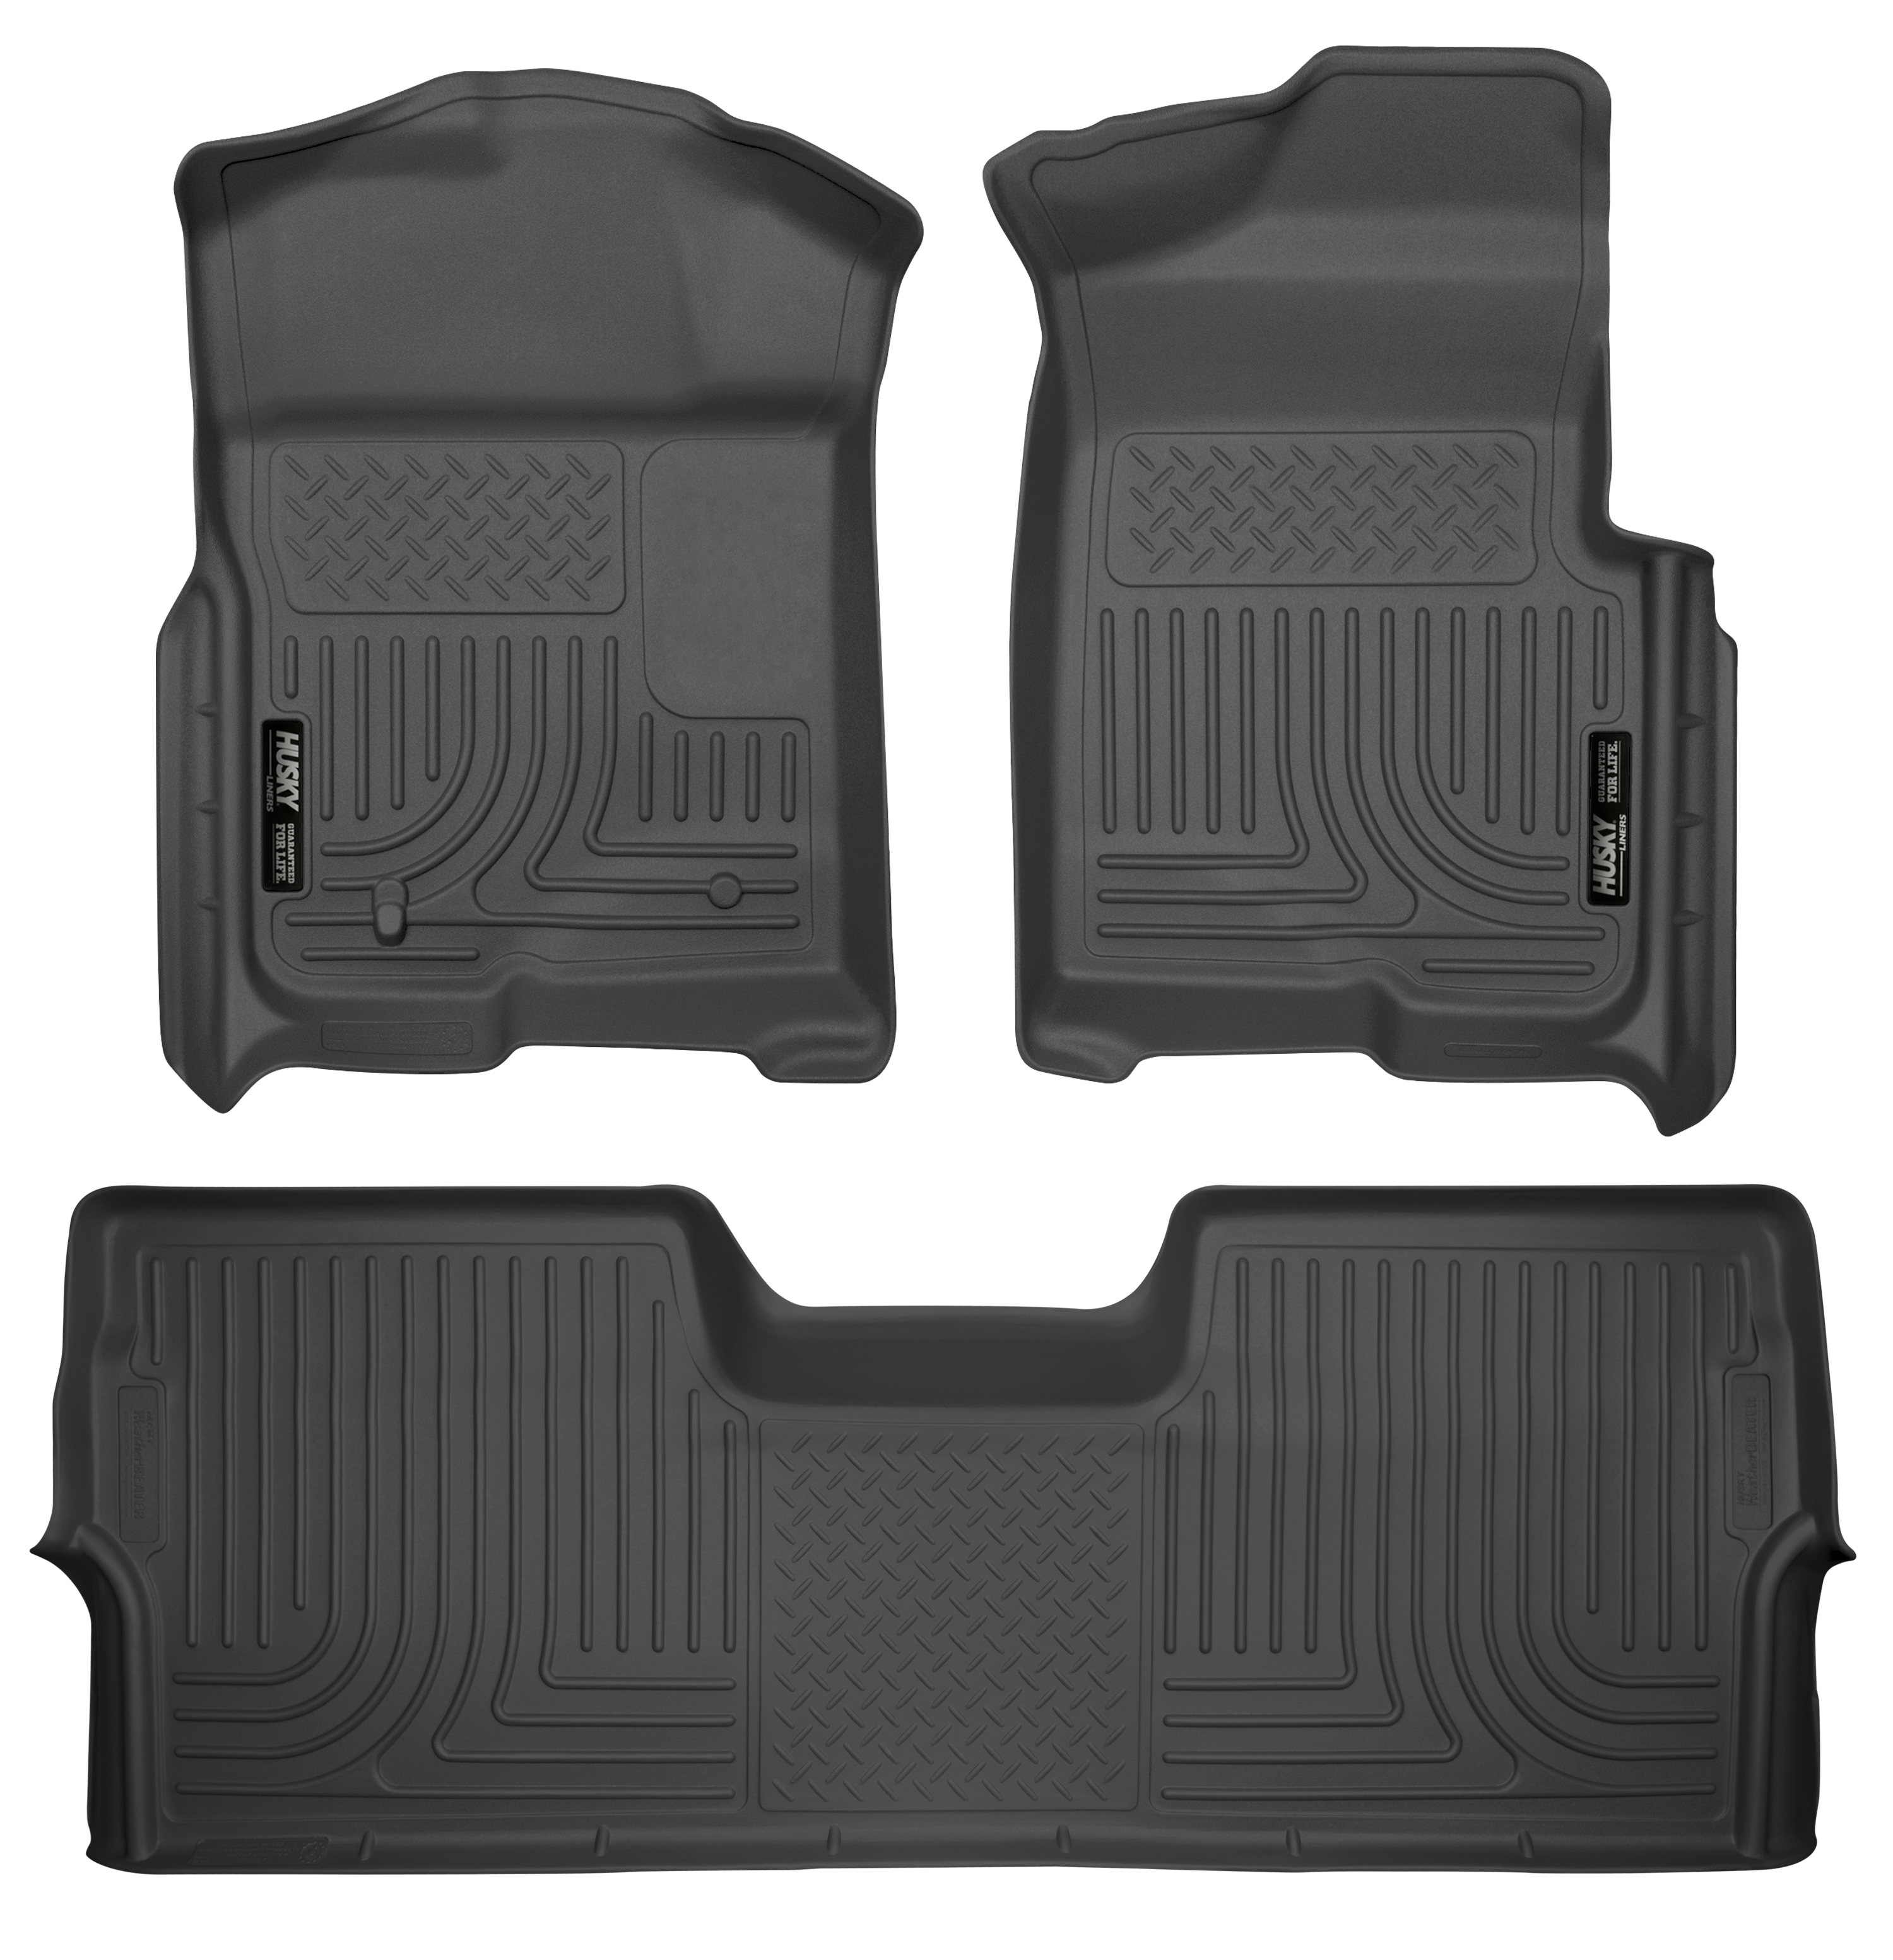 2012 Ford f 150 rubber floor mats #5